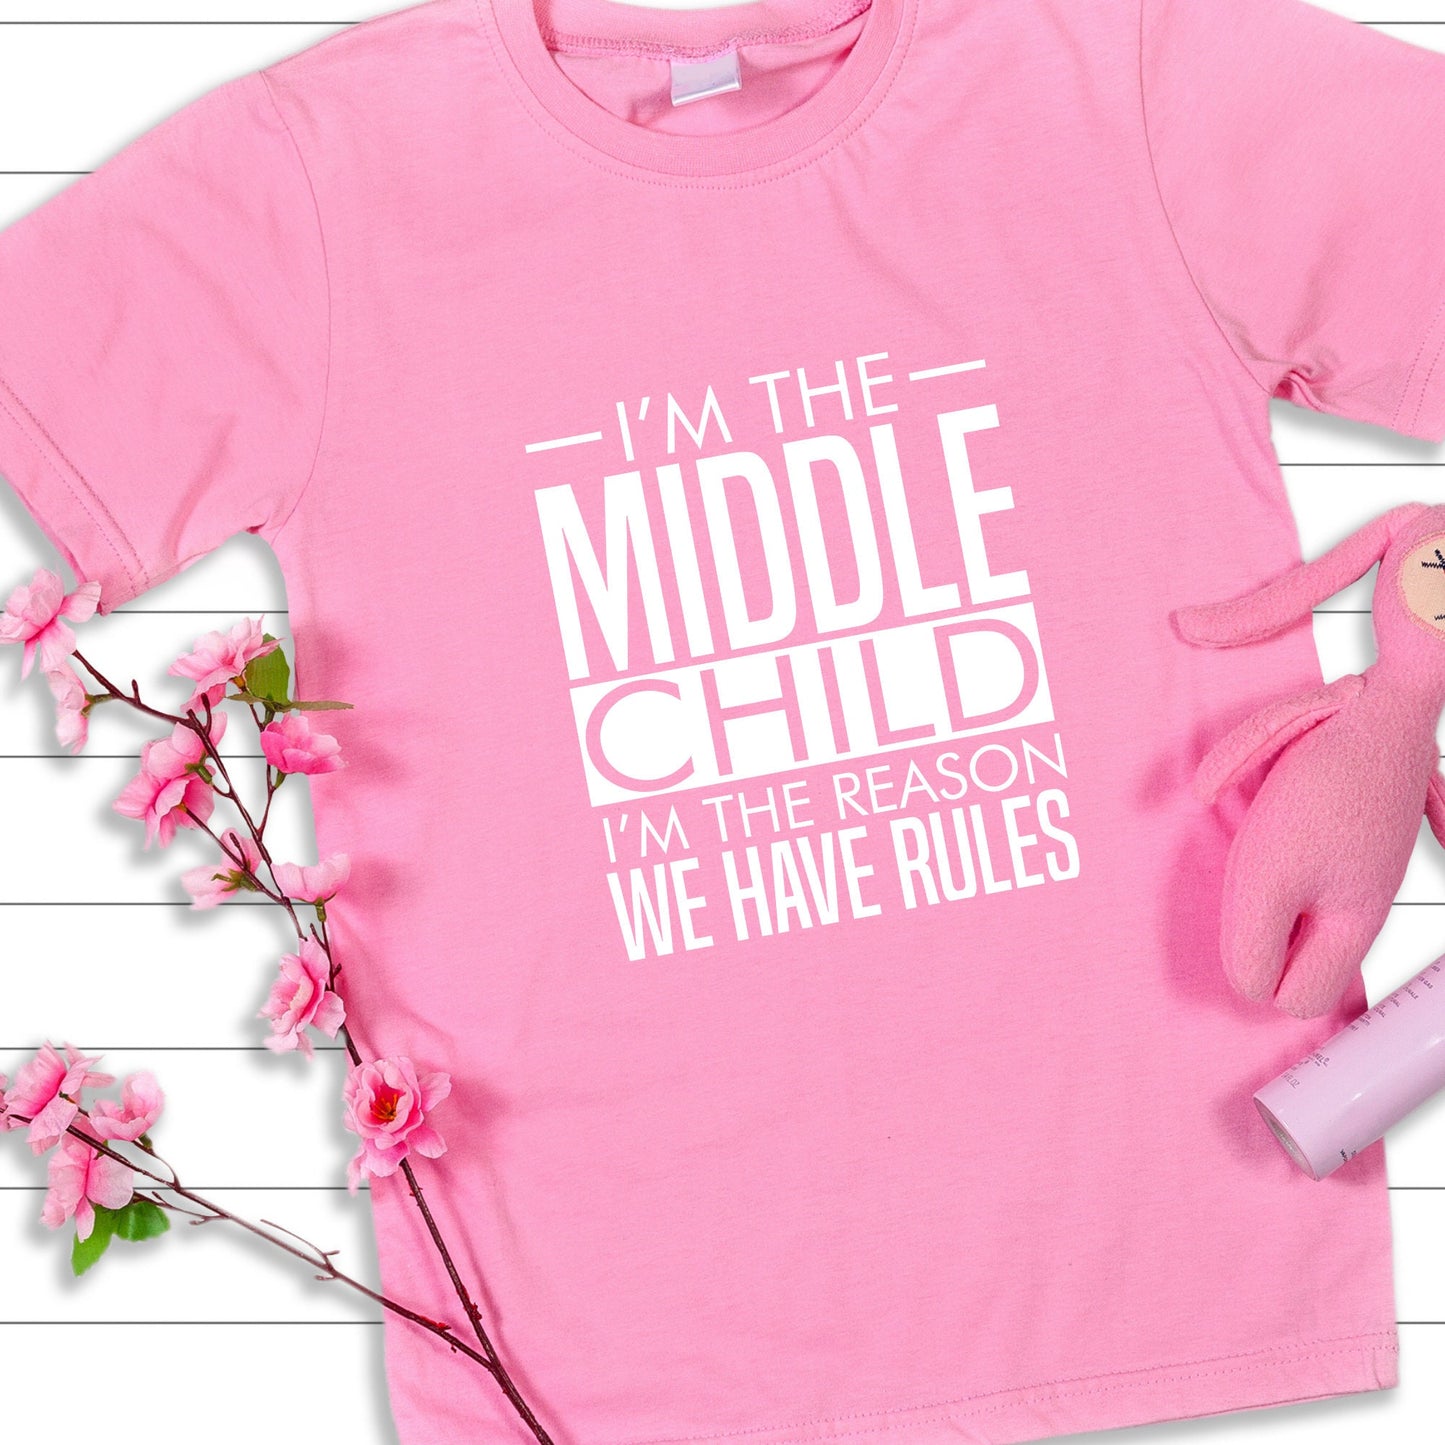 I am the Middle Child-